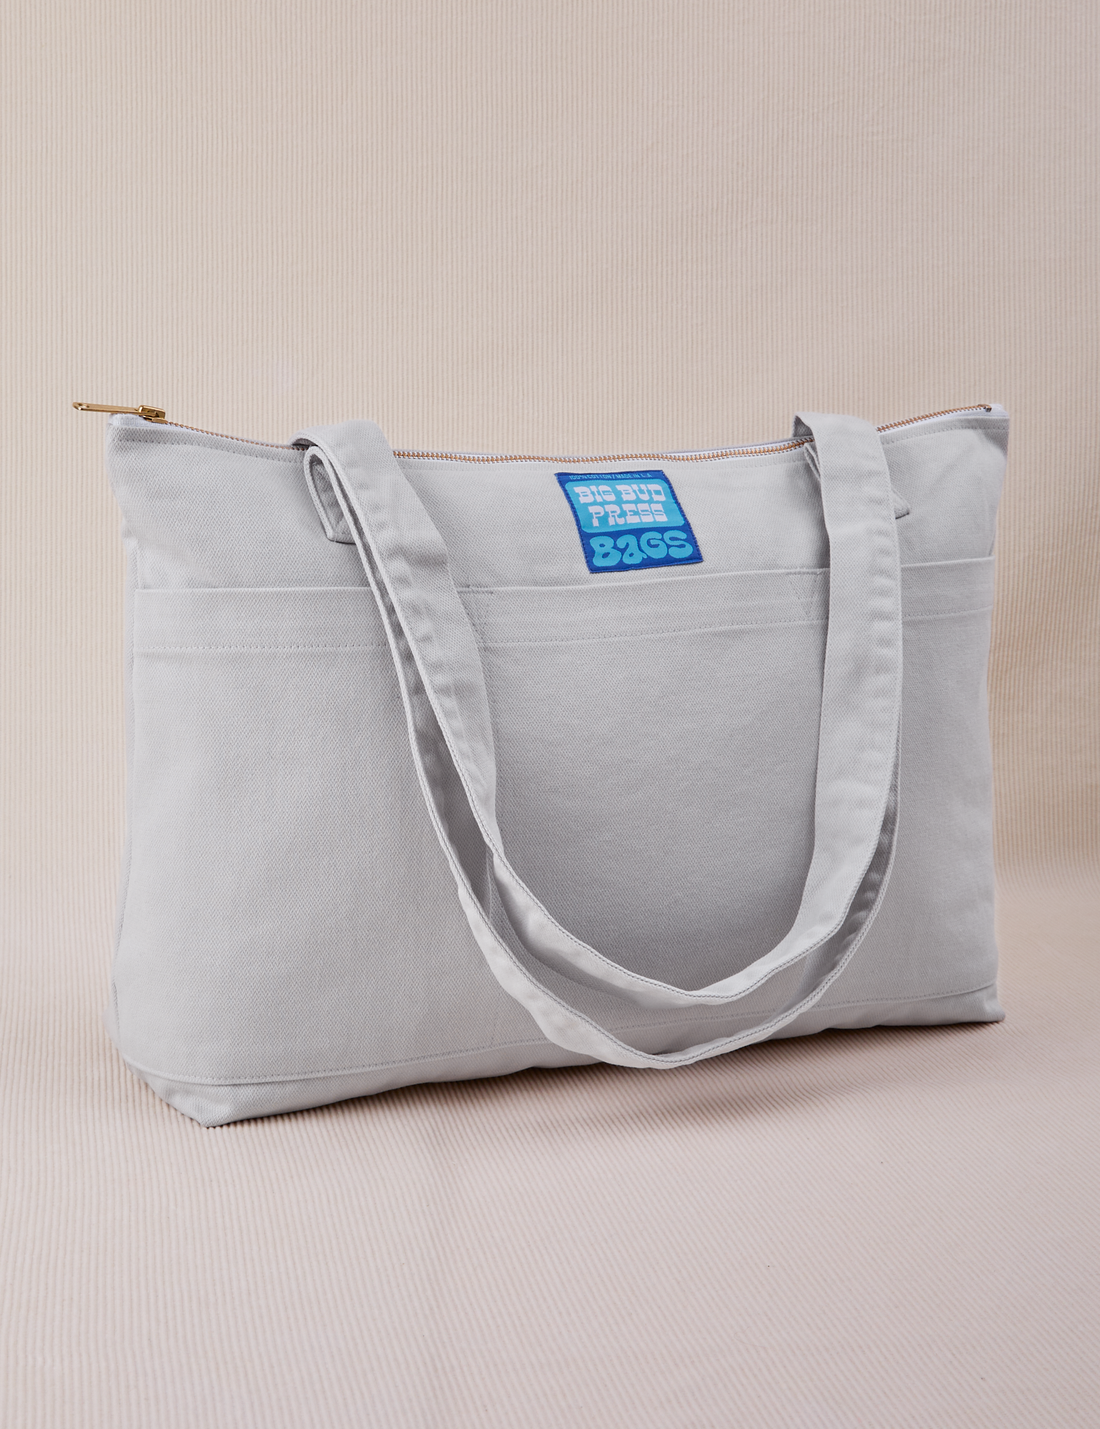 XL Zip Tote in Dishwater White